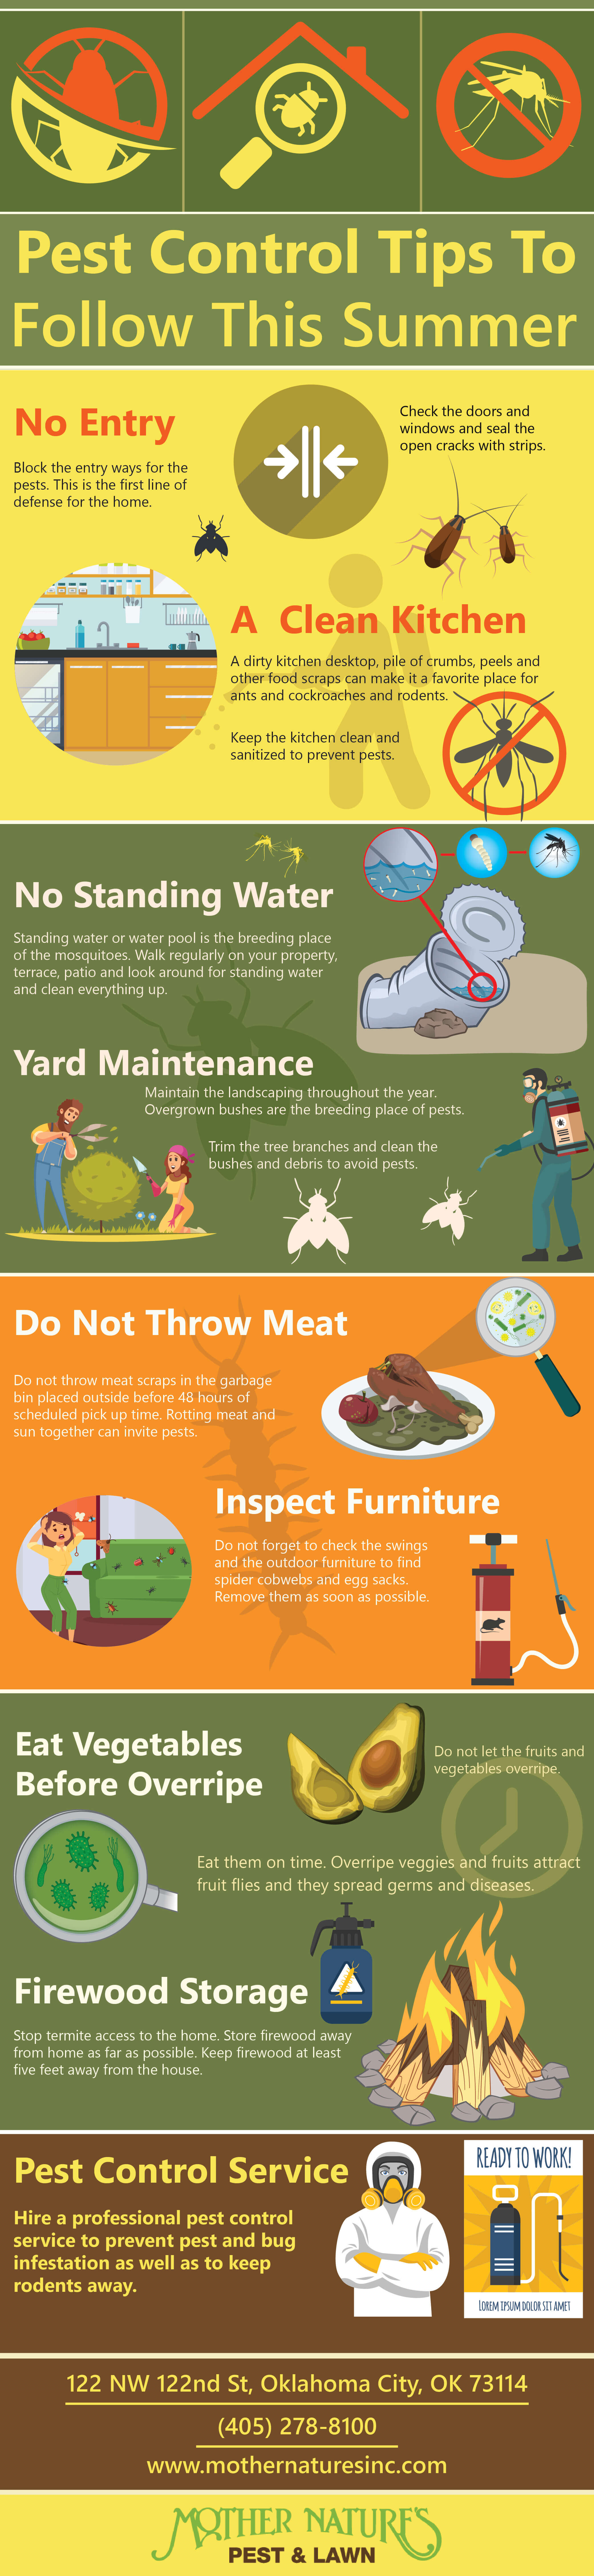 Pest Control Tips to Follow This Summer